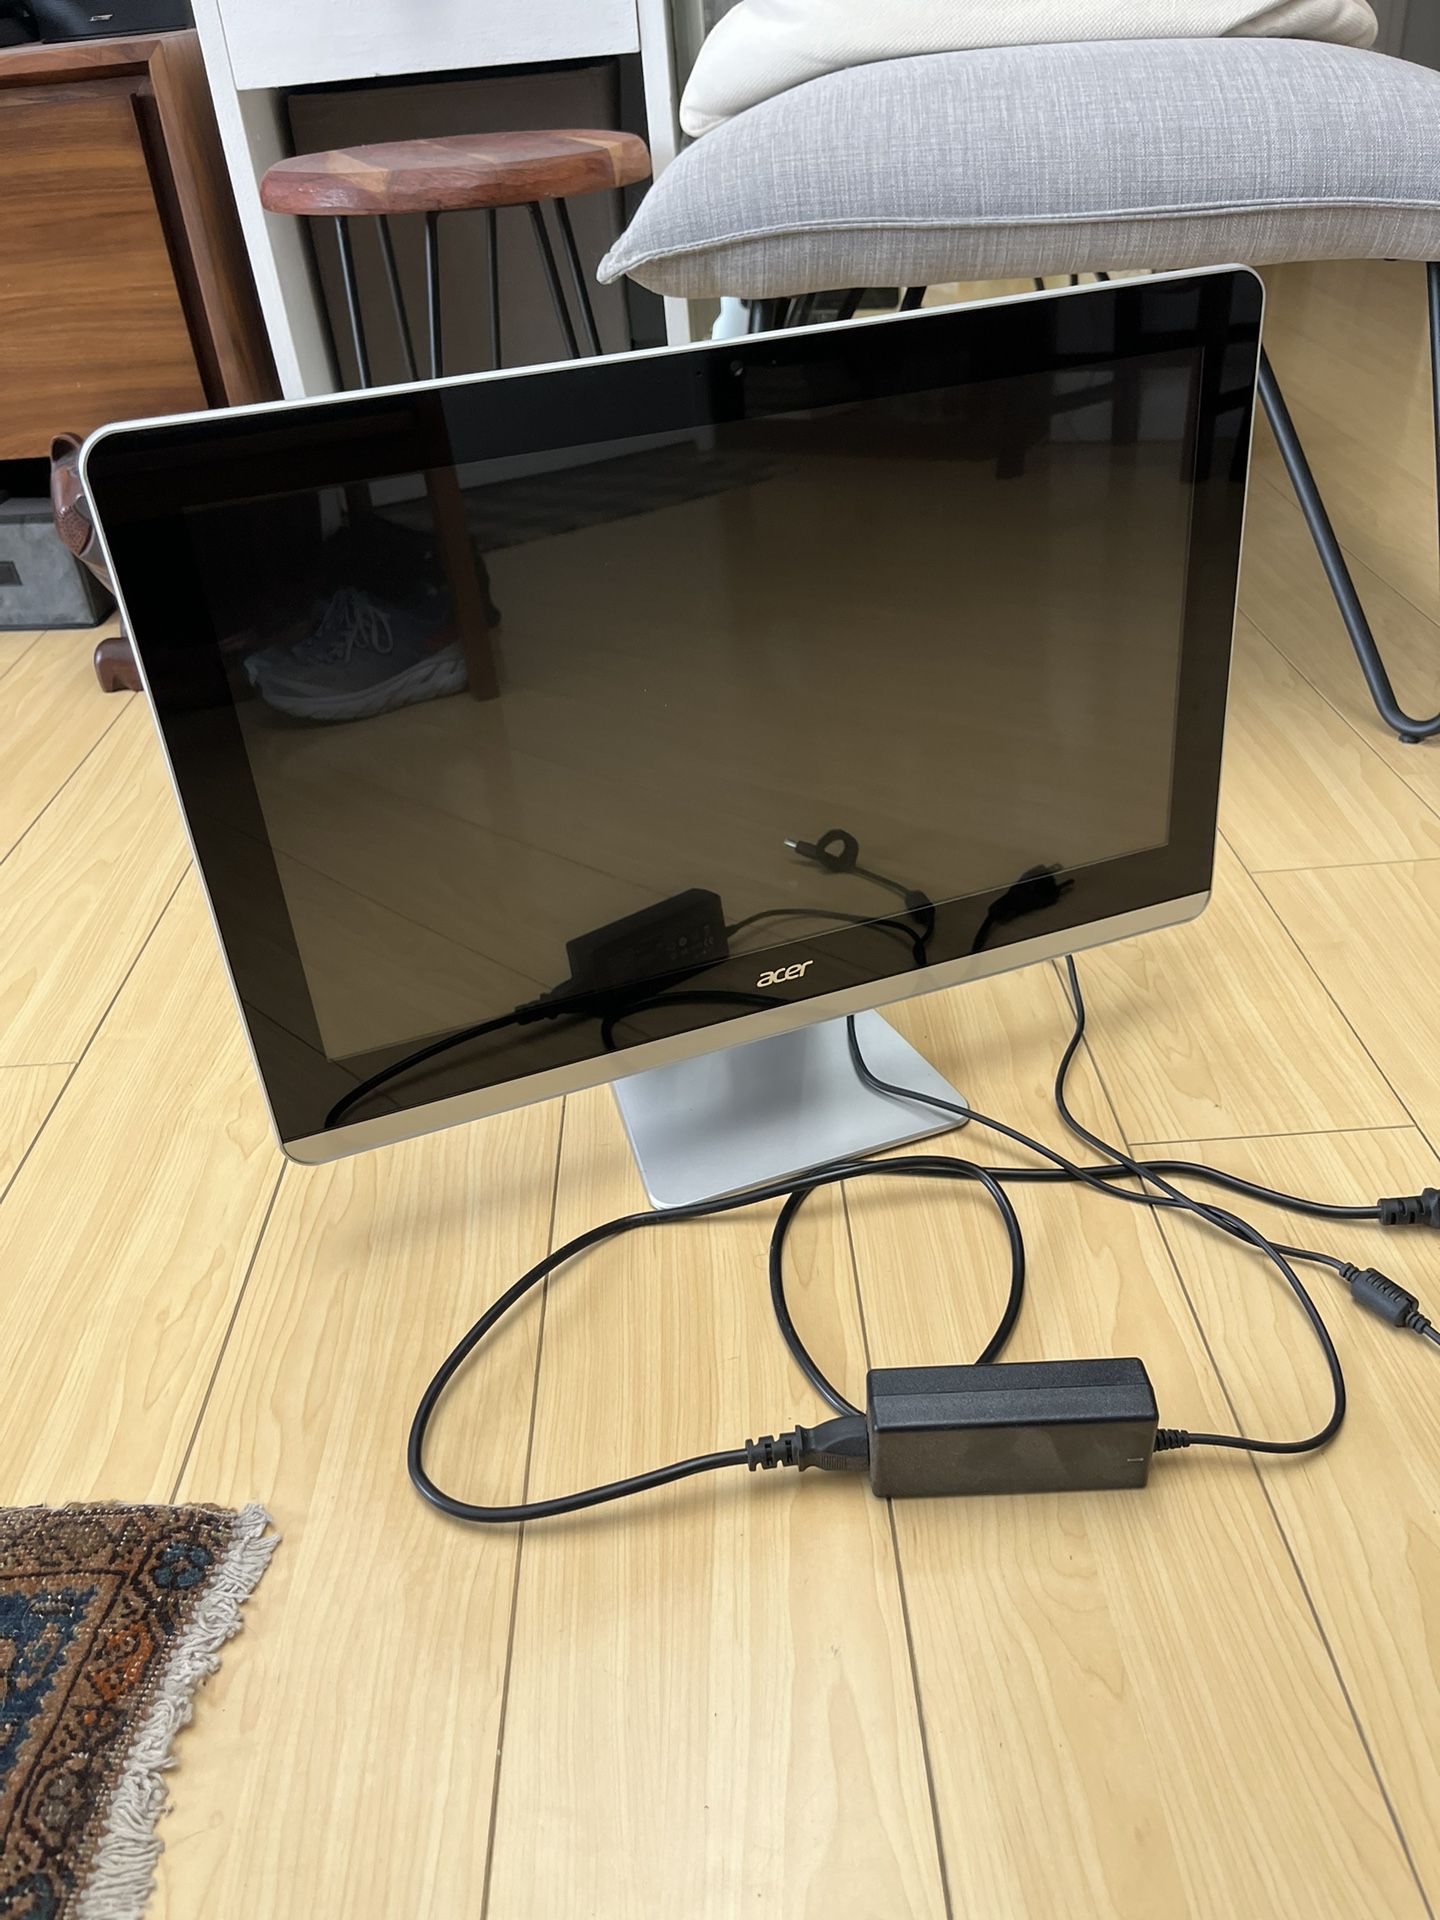 acer aspire zc 700g All In One 